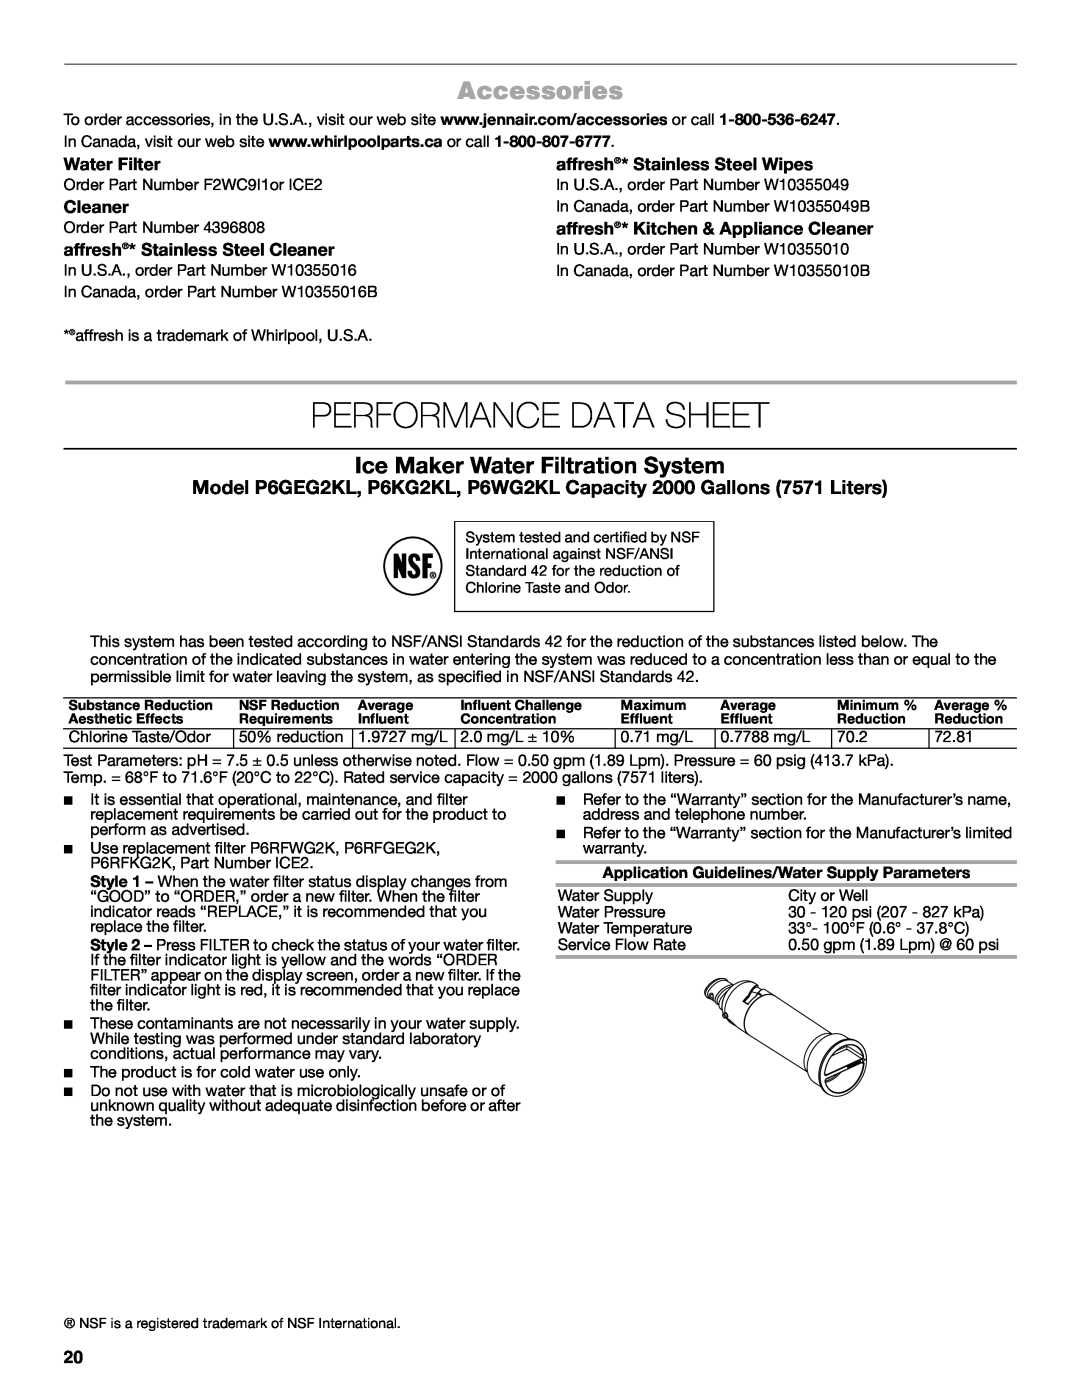 Jenn-Air W10519943B manual Performance Data Sheet, Accessories, Ice Maker Water Filtration System, Water Filter, Cleaner 